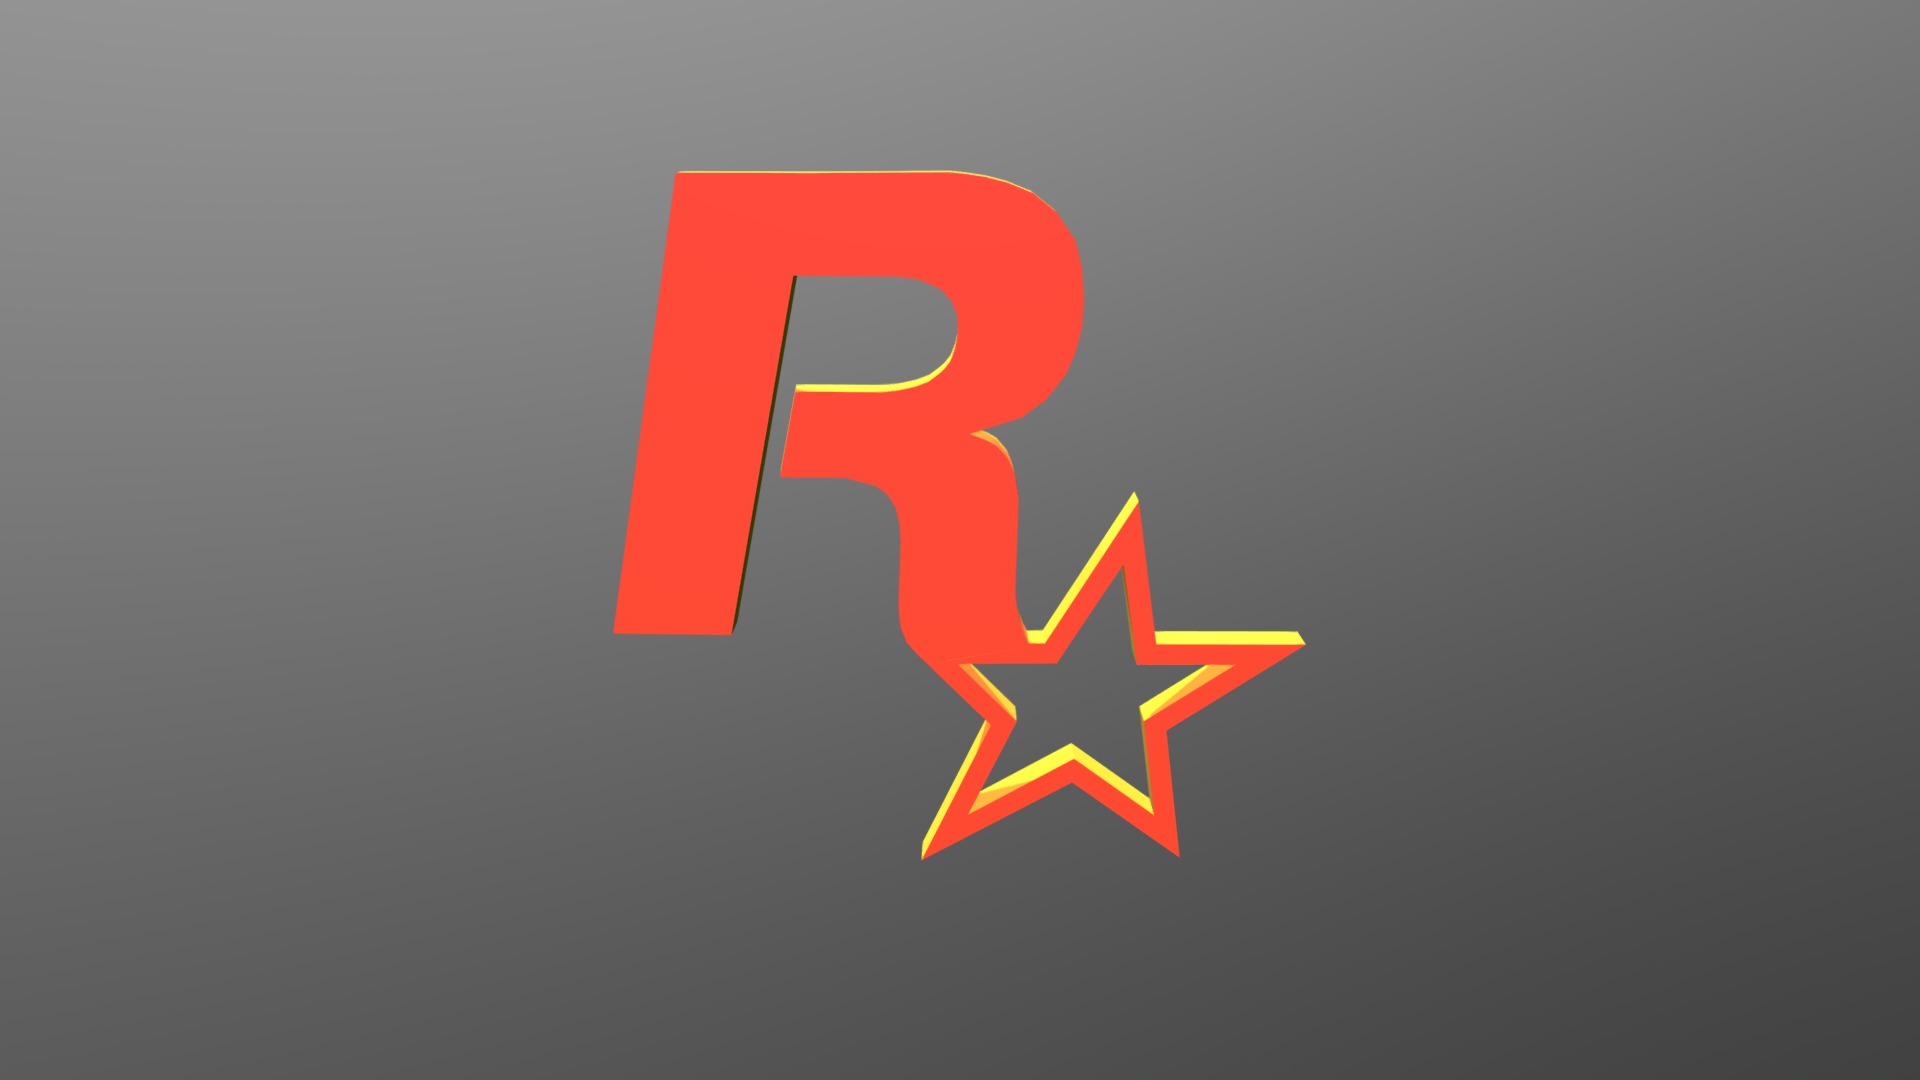 First time using quad draw, done for fun - Rockstar Logo - 3D model by FacultyManBruce 3d model